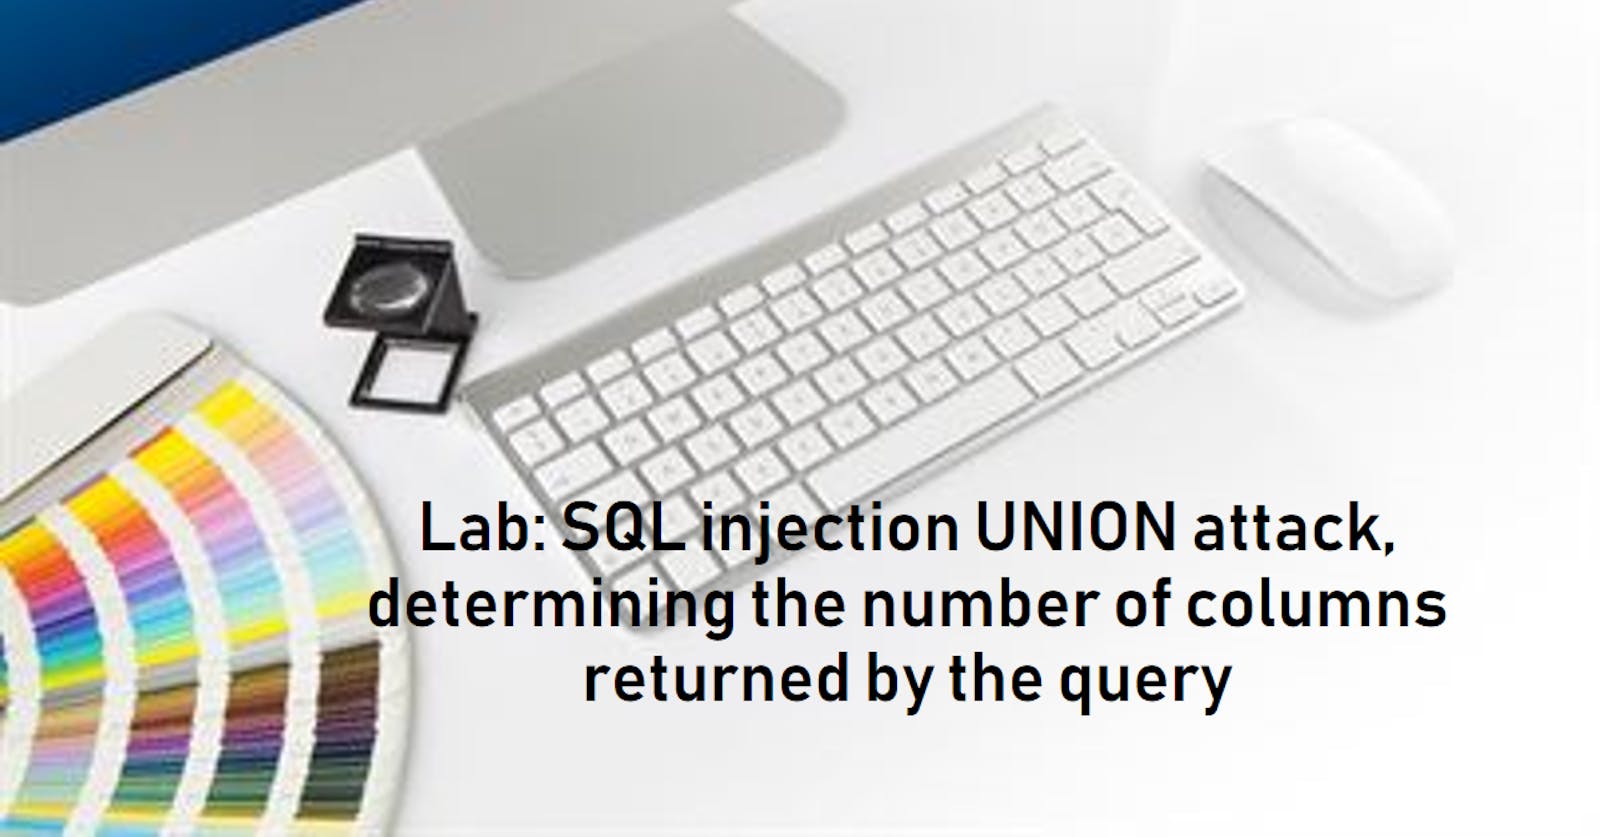 Lab: SQL injection UNION attack, determining the number of columns returned by the query